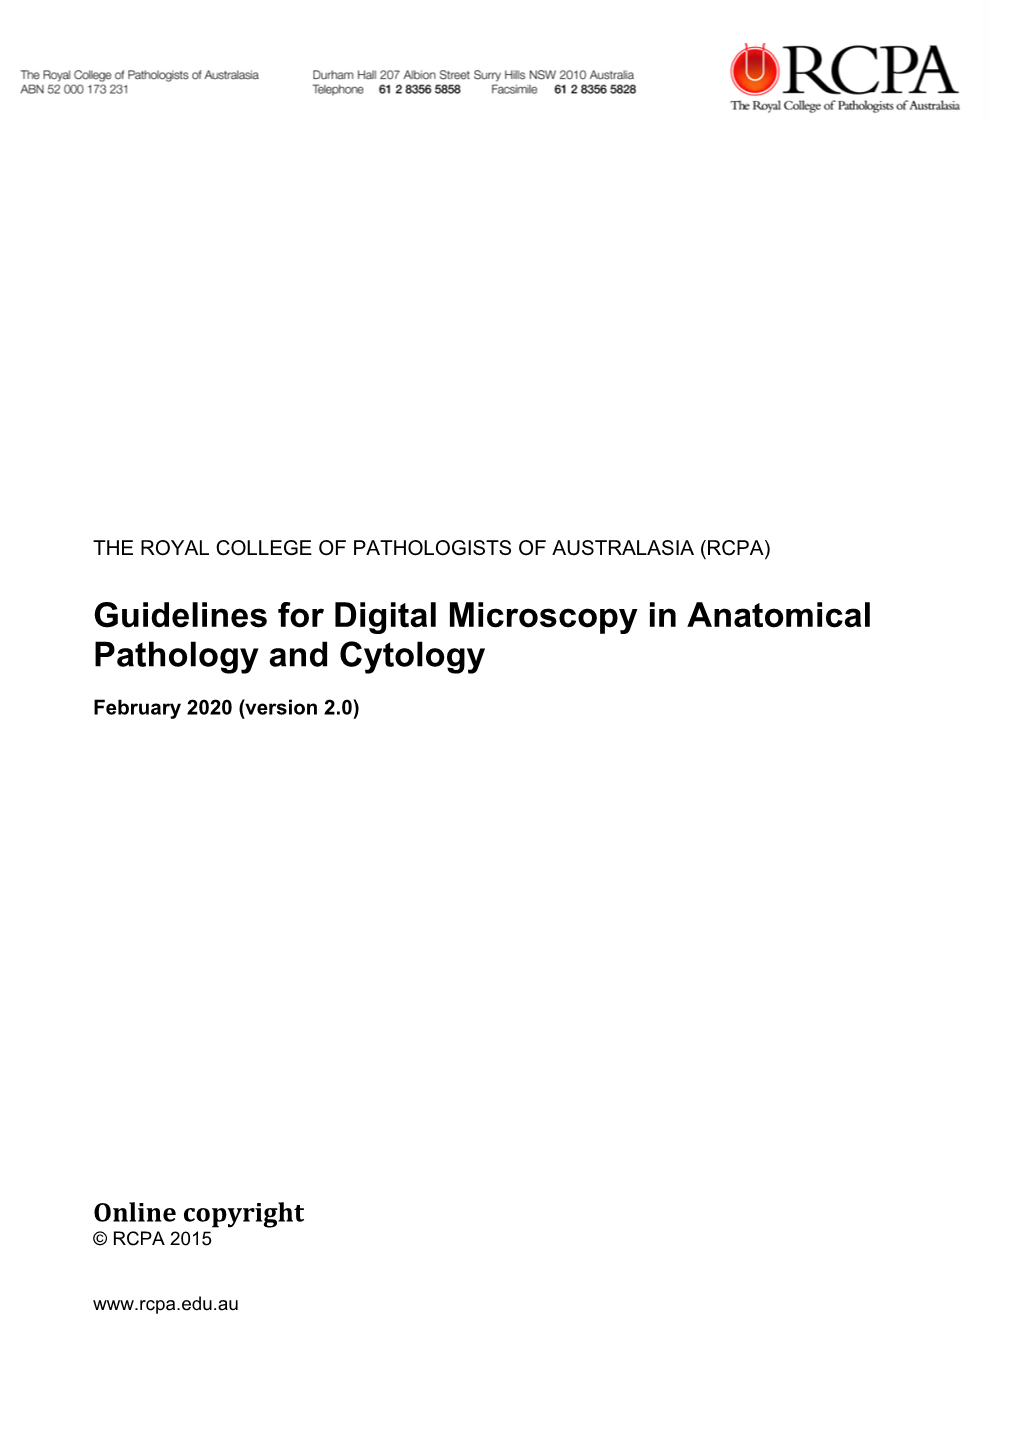 Guidelines for Digital Microscopy in Anatomical Pathology and Cytology